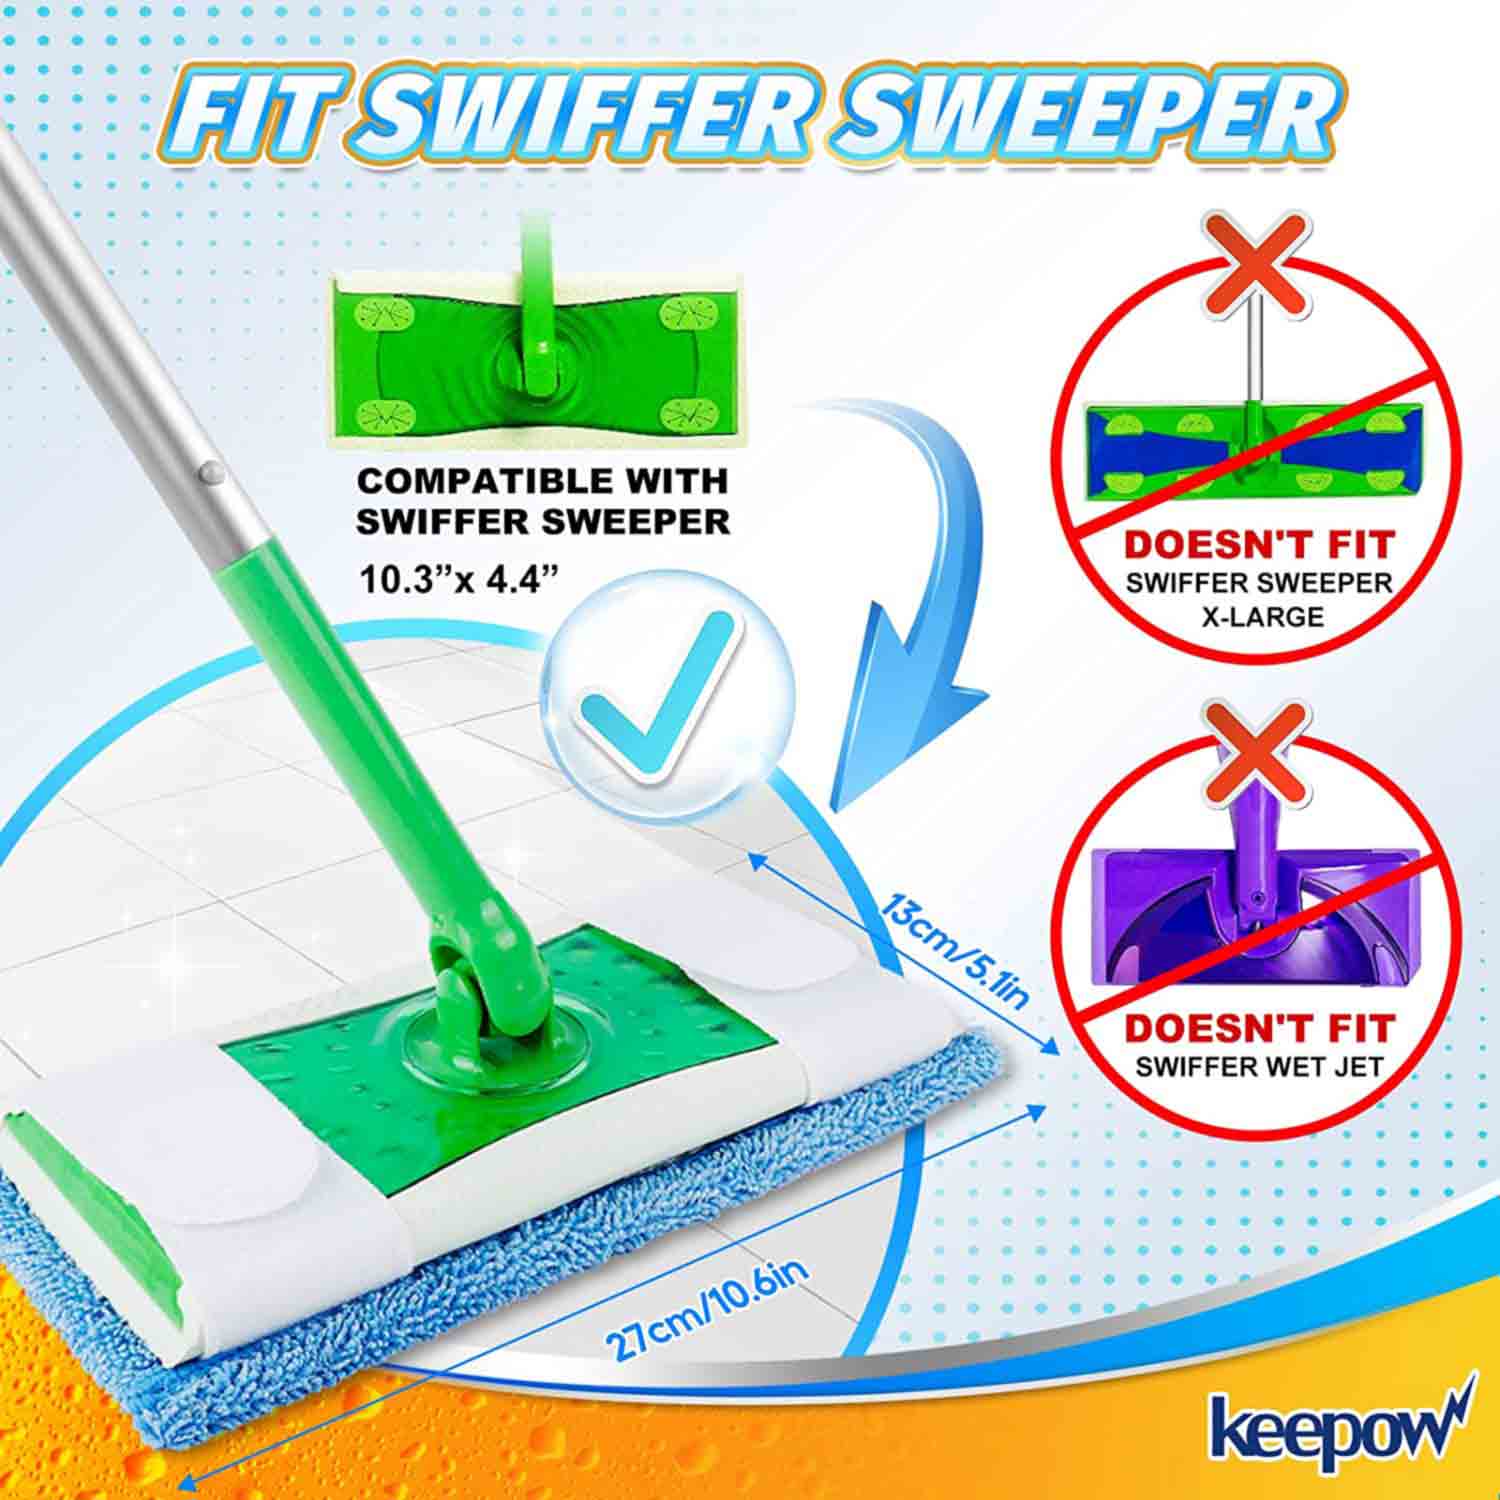 KEEPOW Reusable Microfiber Pads Compatible with Swiffer Sweeper Mops, Washable Dry Sweeping Cloths, Mopping Refills Cloths for Wet and Dry Sweeping, 4 Pack (Mop is Not Include)